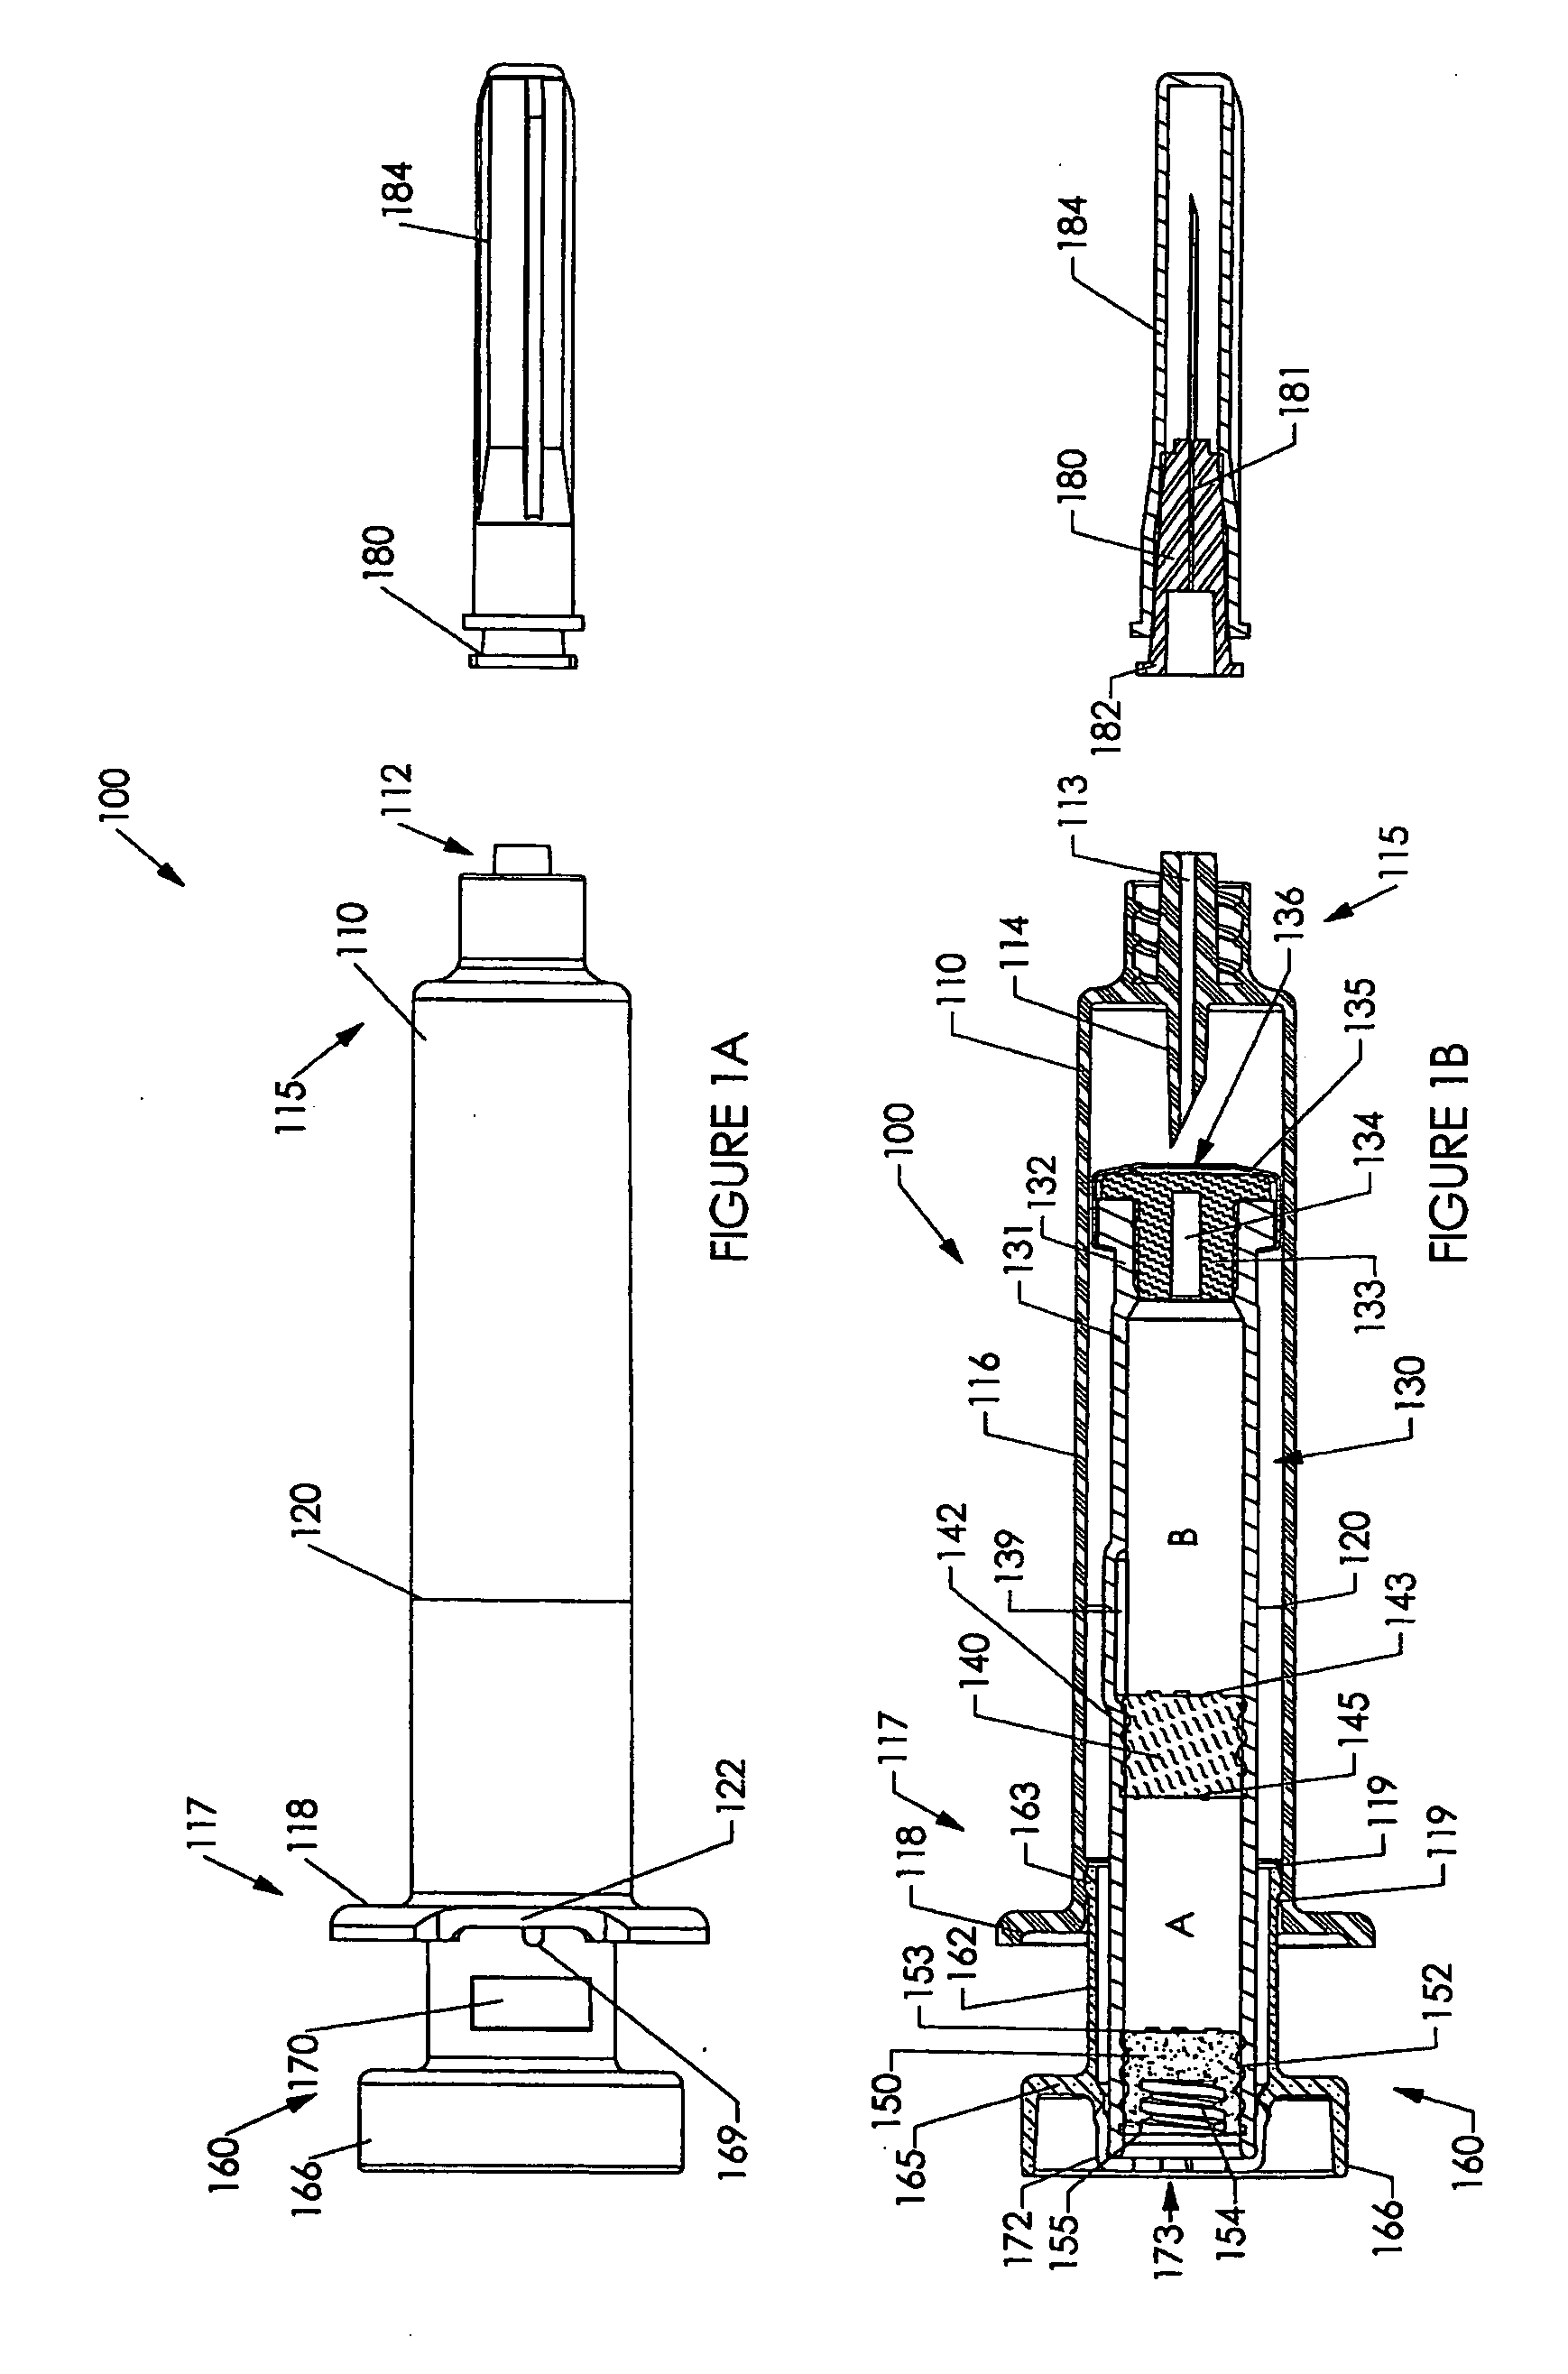 Device and method for pharmaceutical mixing and delivery